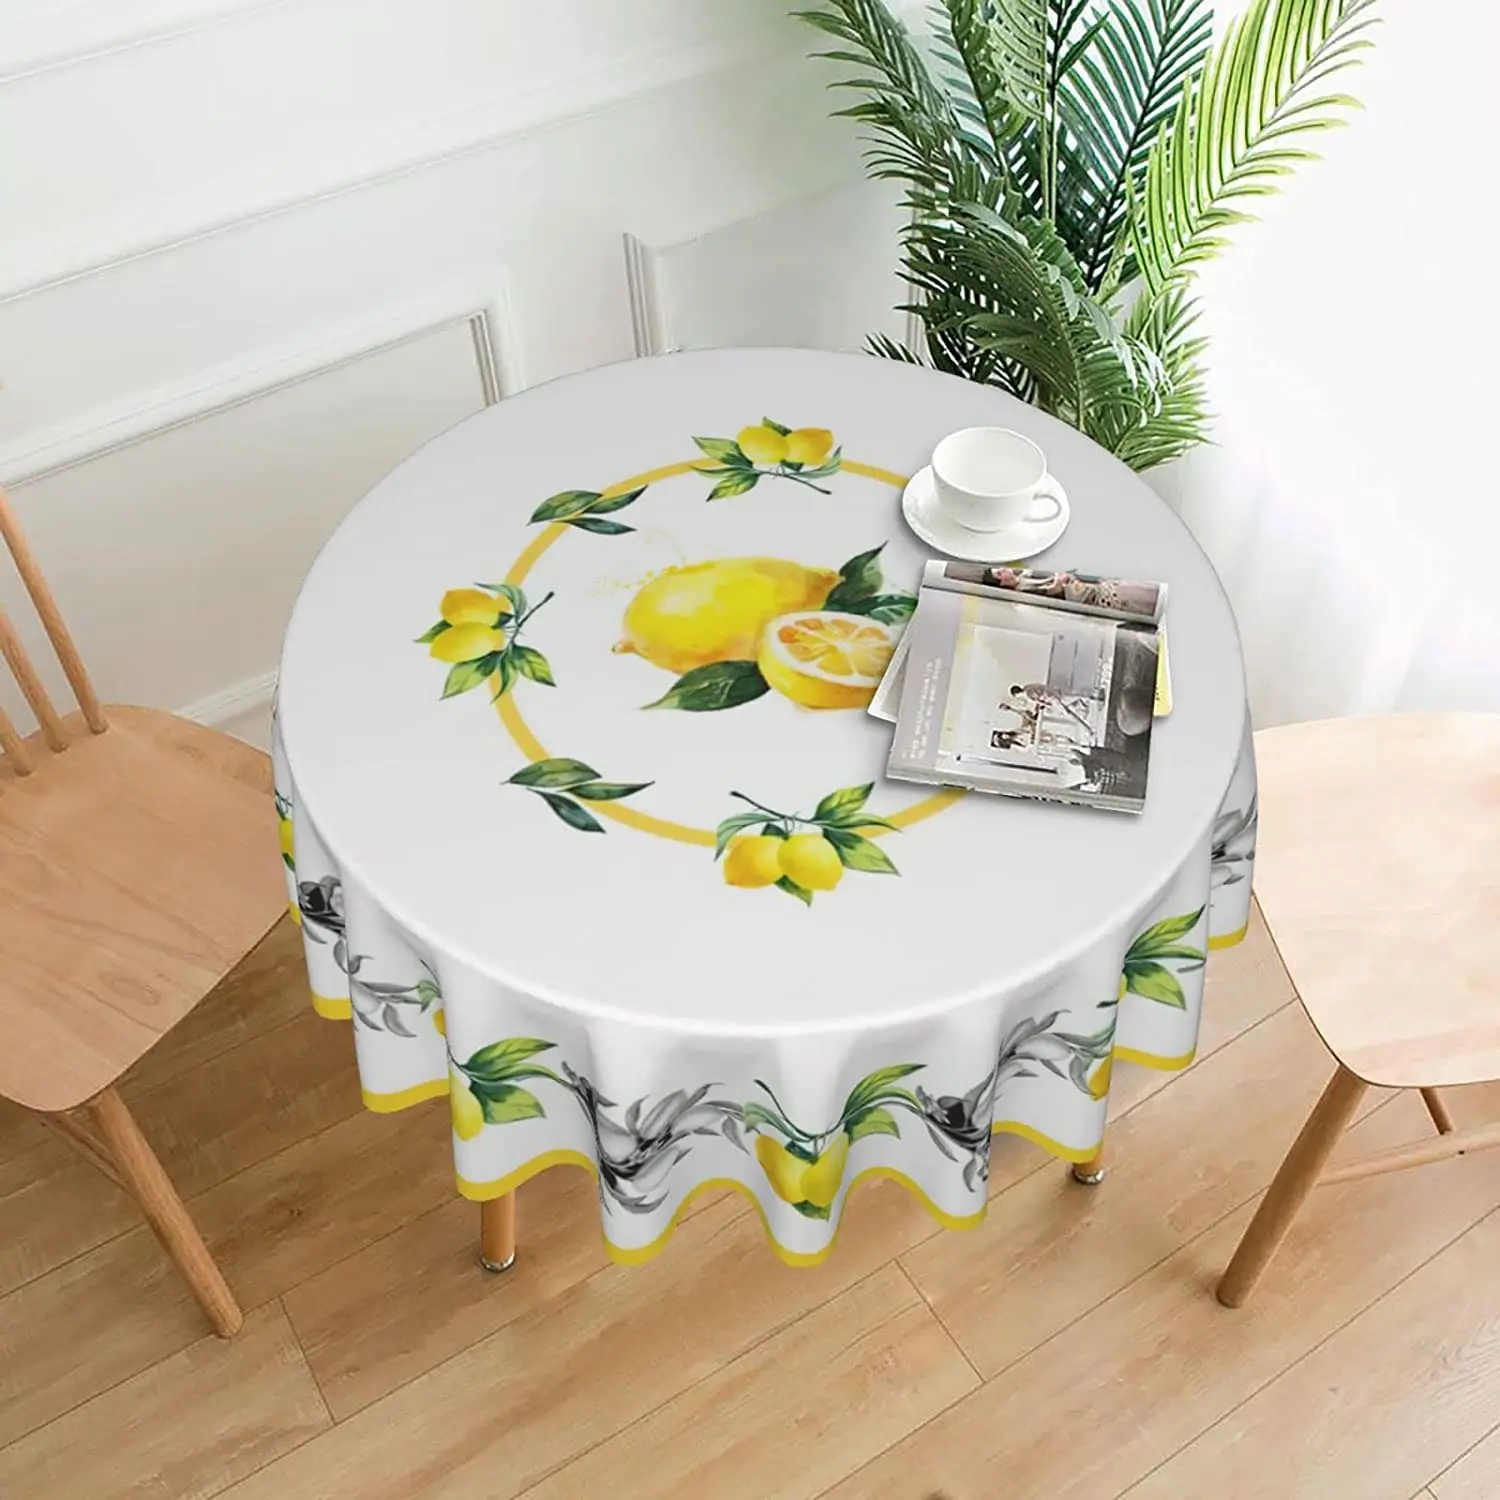 

Yellow Lemon Round Tablecloths, Summer Circular Table Cover Washable Polyester for BBQ, Buffet Table, Parties, Holiday Dinner